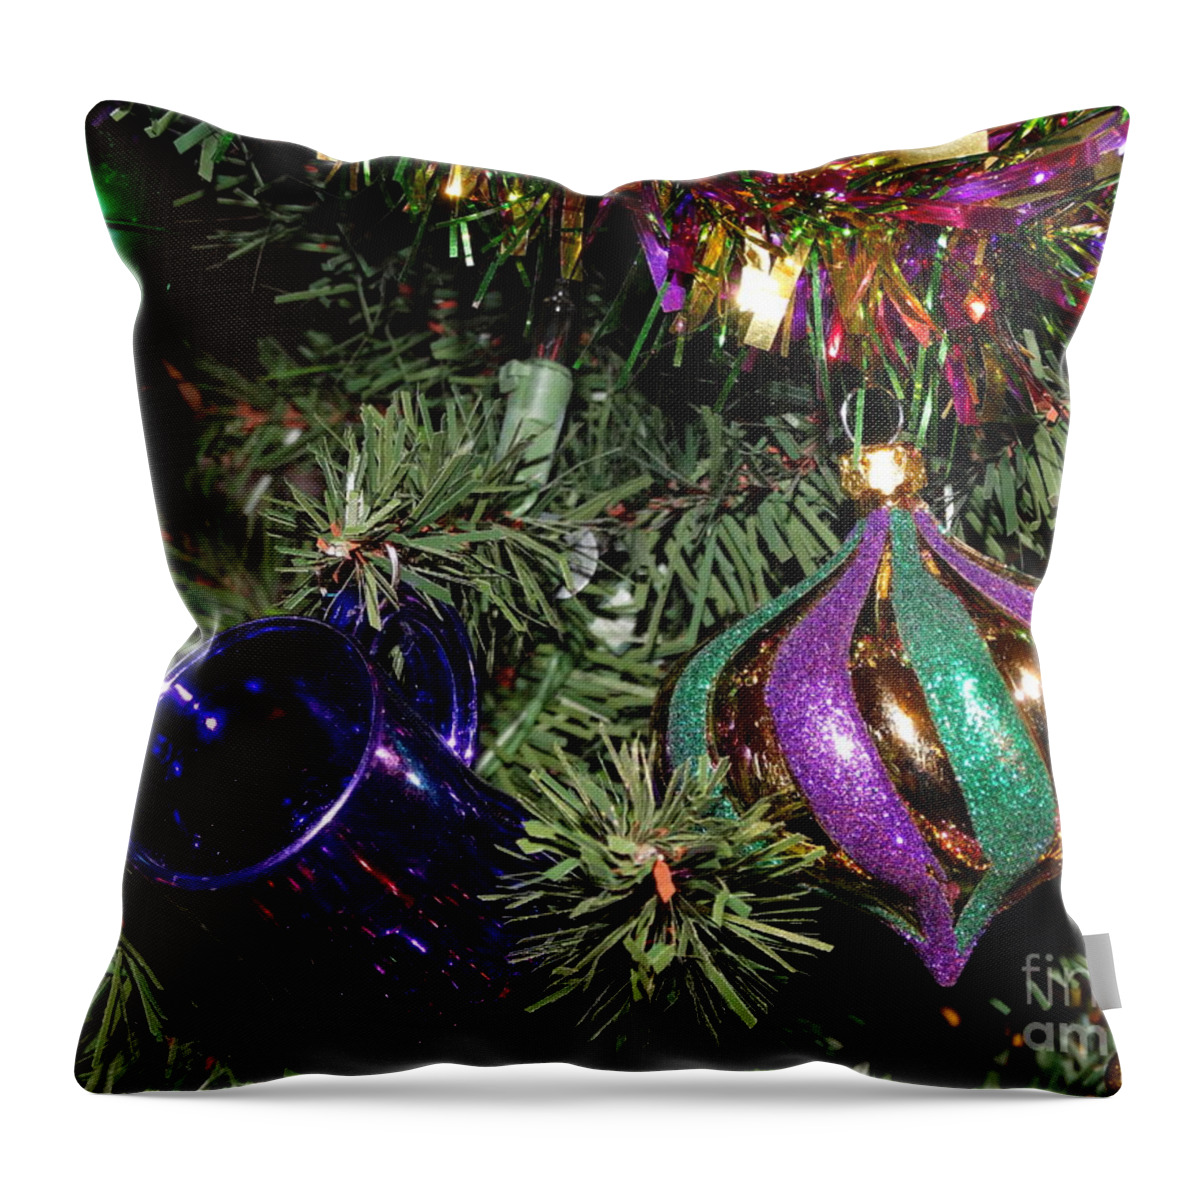 Southern Throw Pillow featuring the photograph Mardi Gras Greeting Card by Joseph Baril